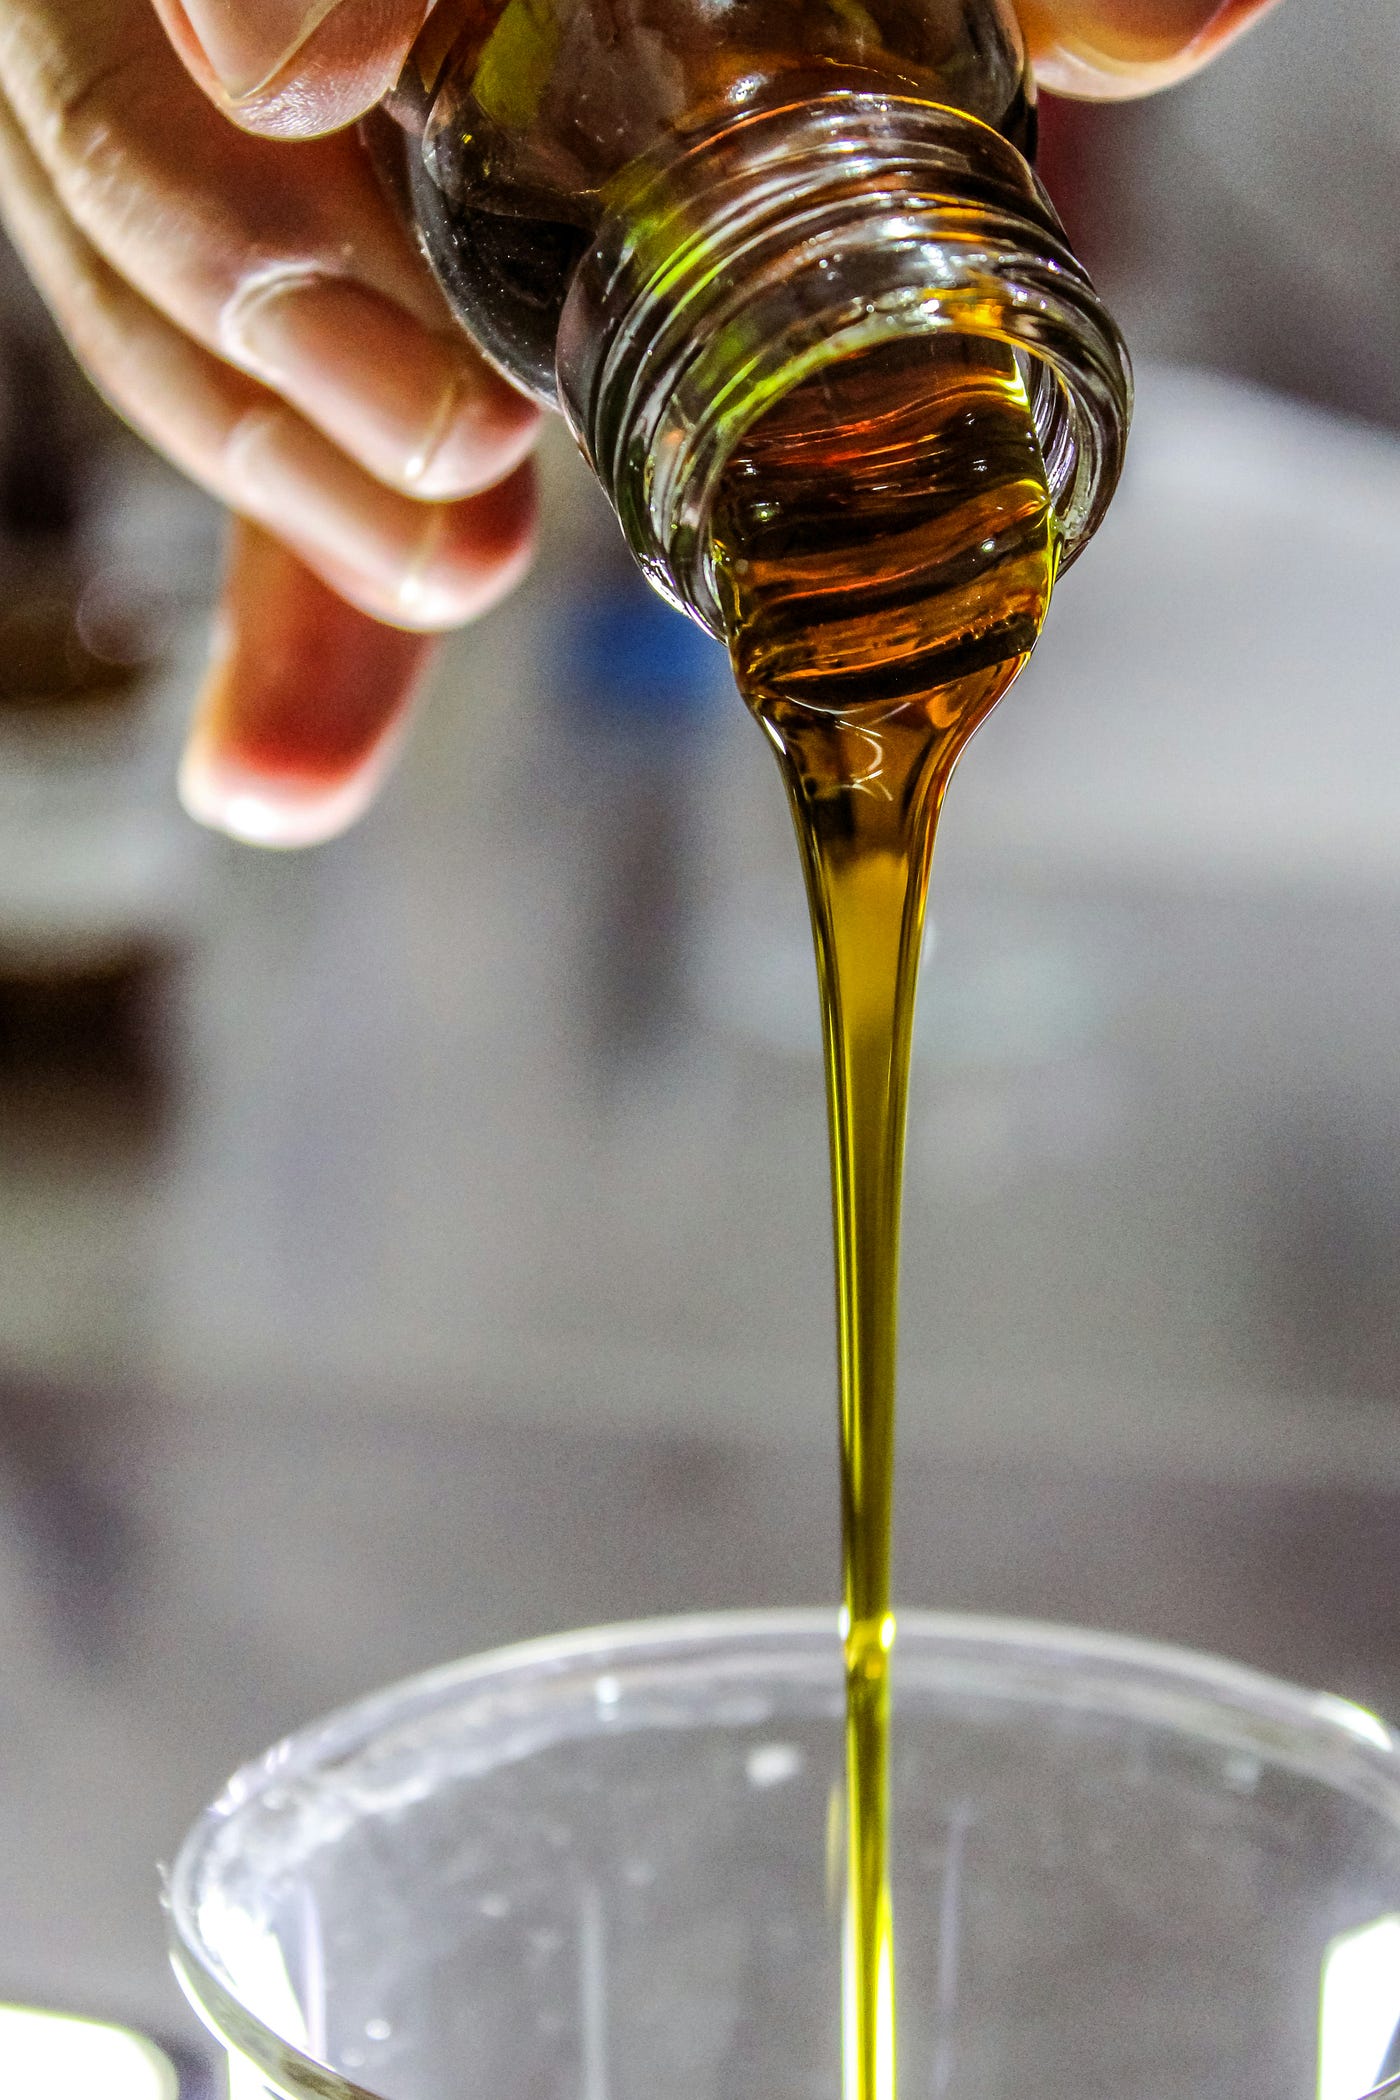 A person pours olive oil into a cup. The Atlantic diet includes olive oil.